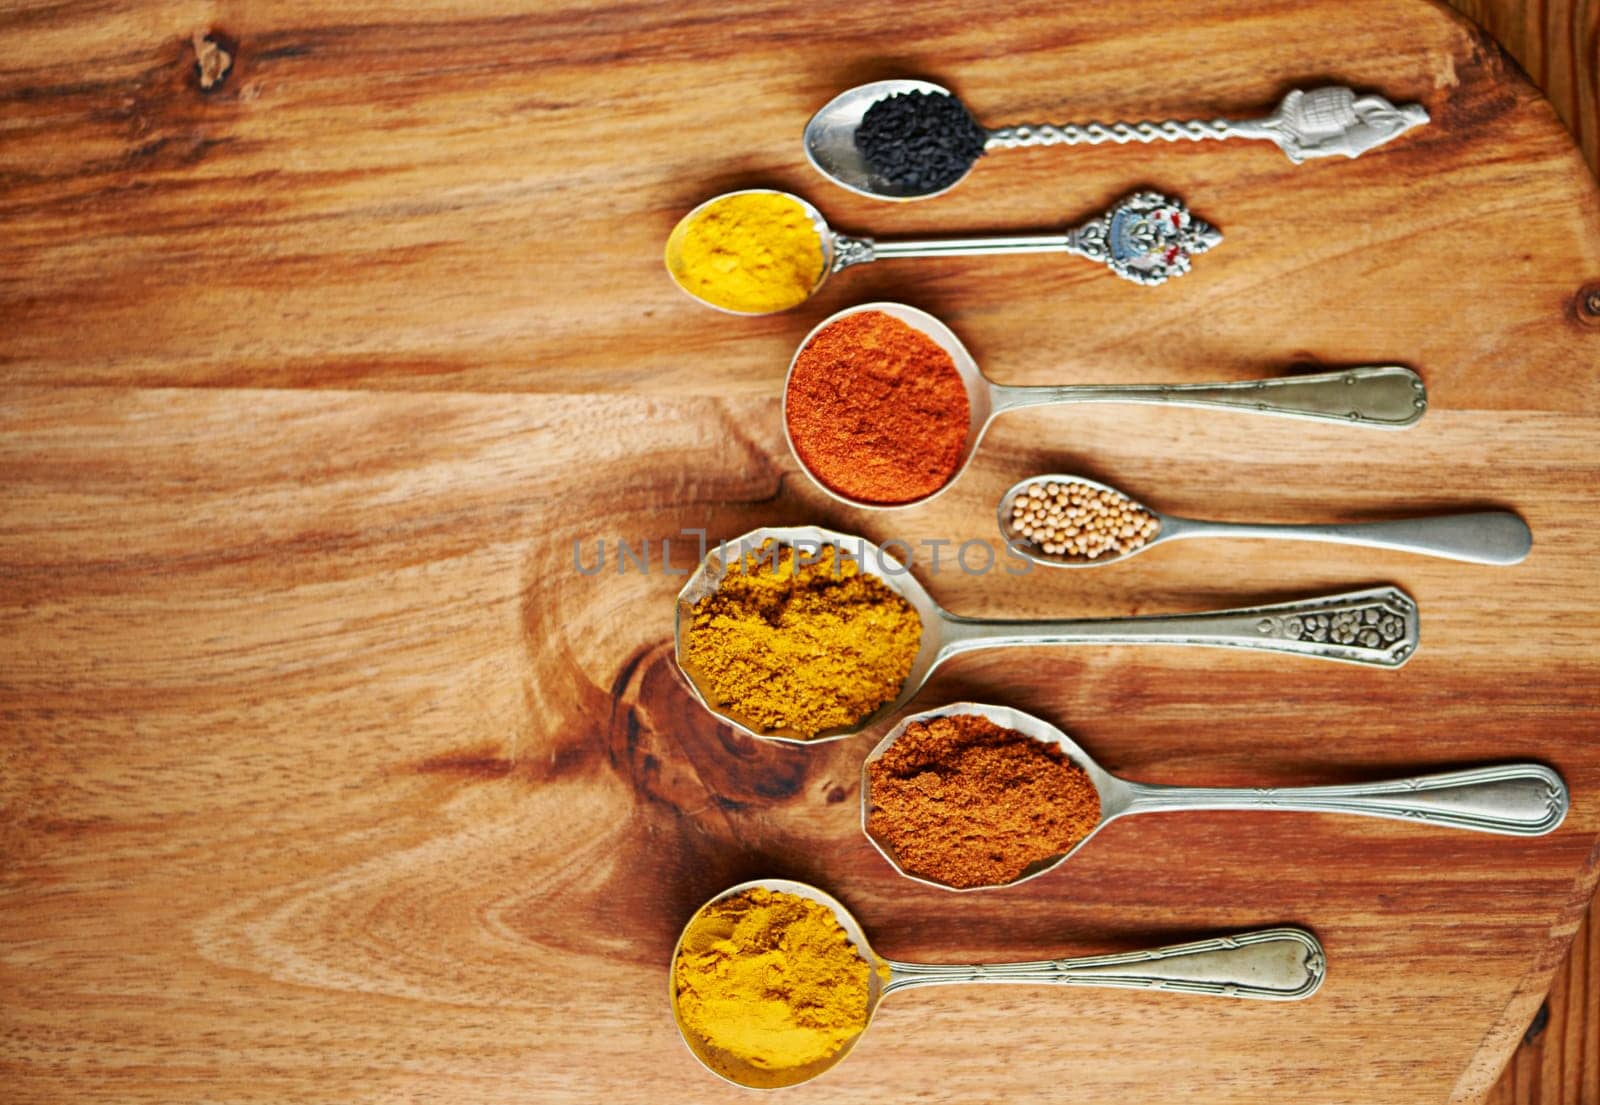 Spoons, spice and selection of ingredients for seasoning on kitchen table, turmeric and paprika for meal. Top view, condiments and options for cooking in Indian culture, cumin and food preparation.